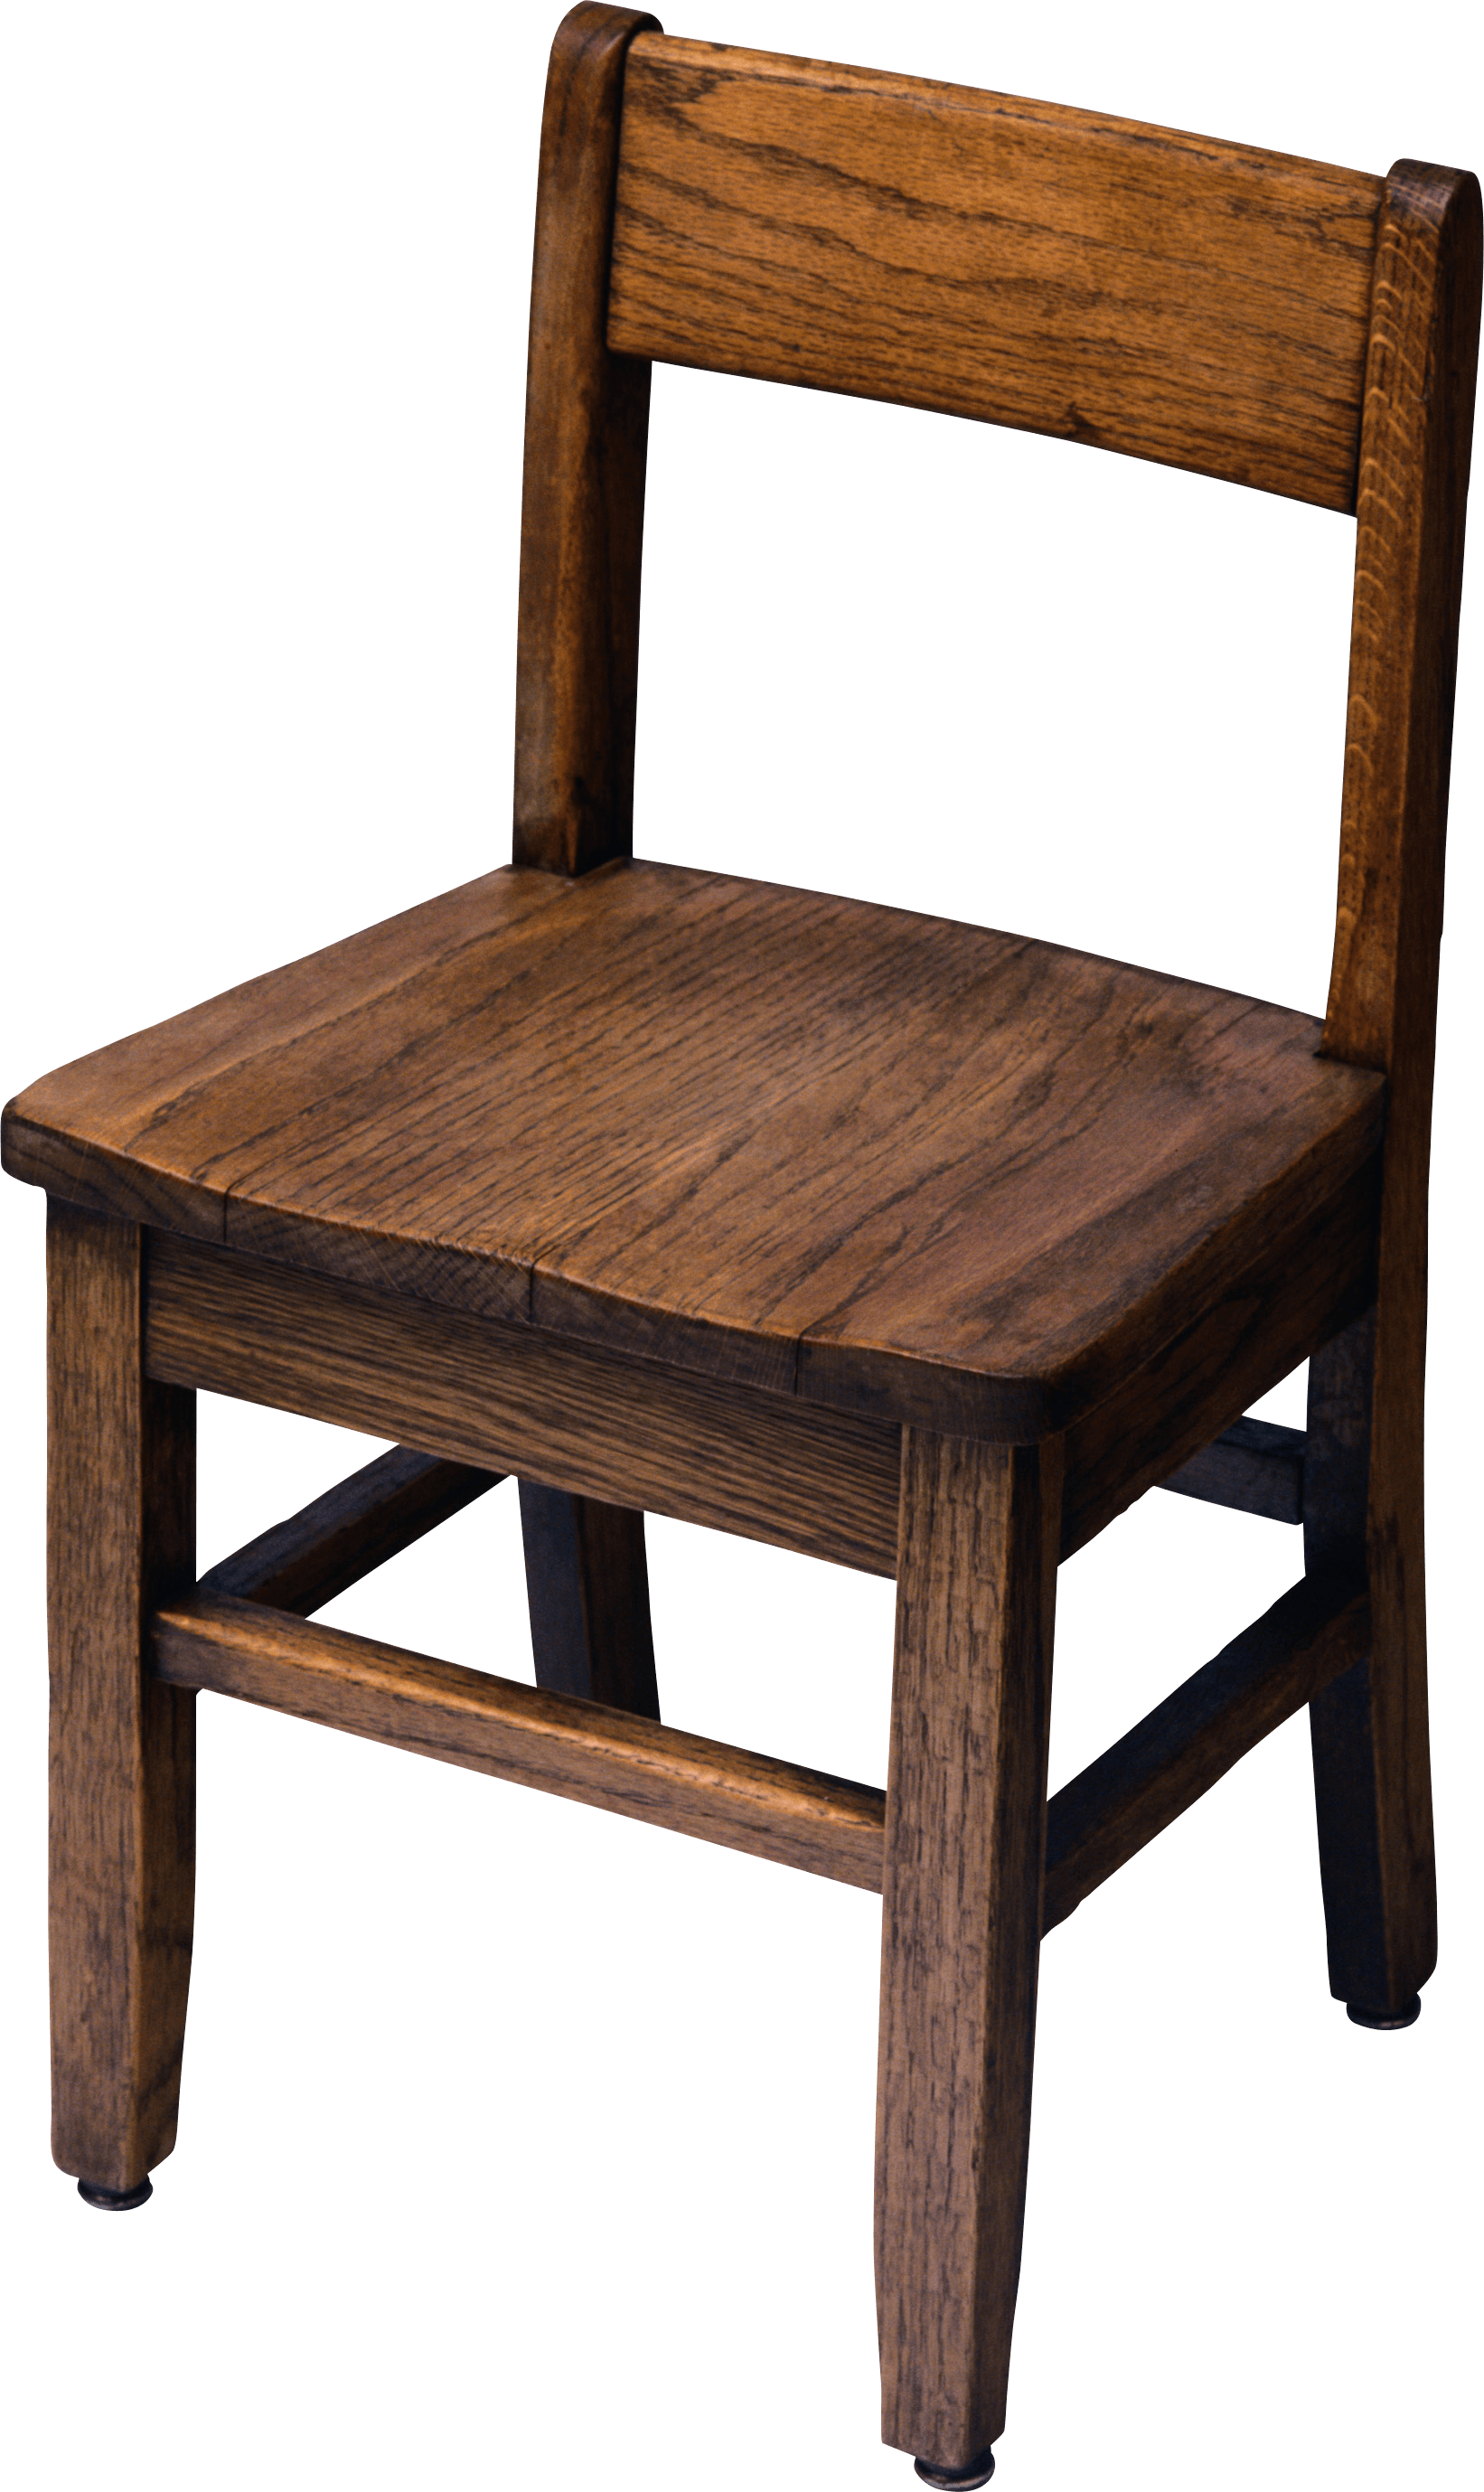 Old Wooden Chair transparent PNG.